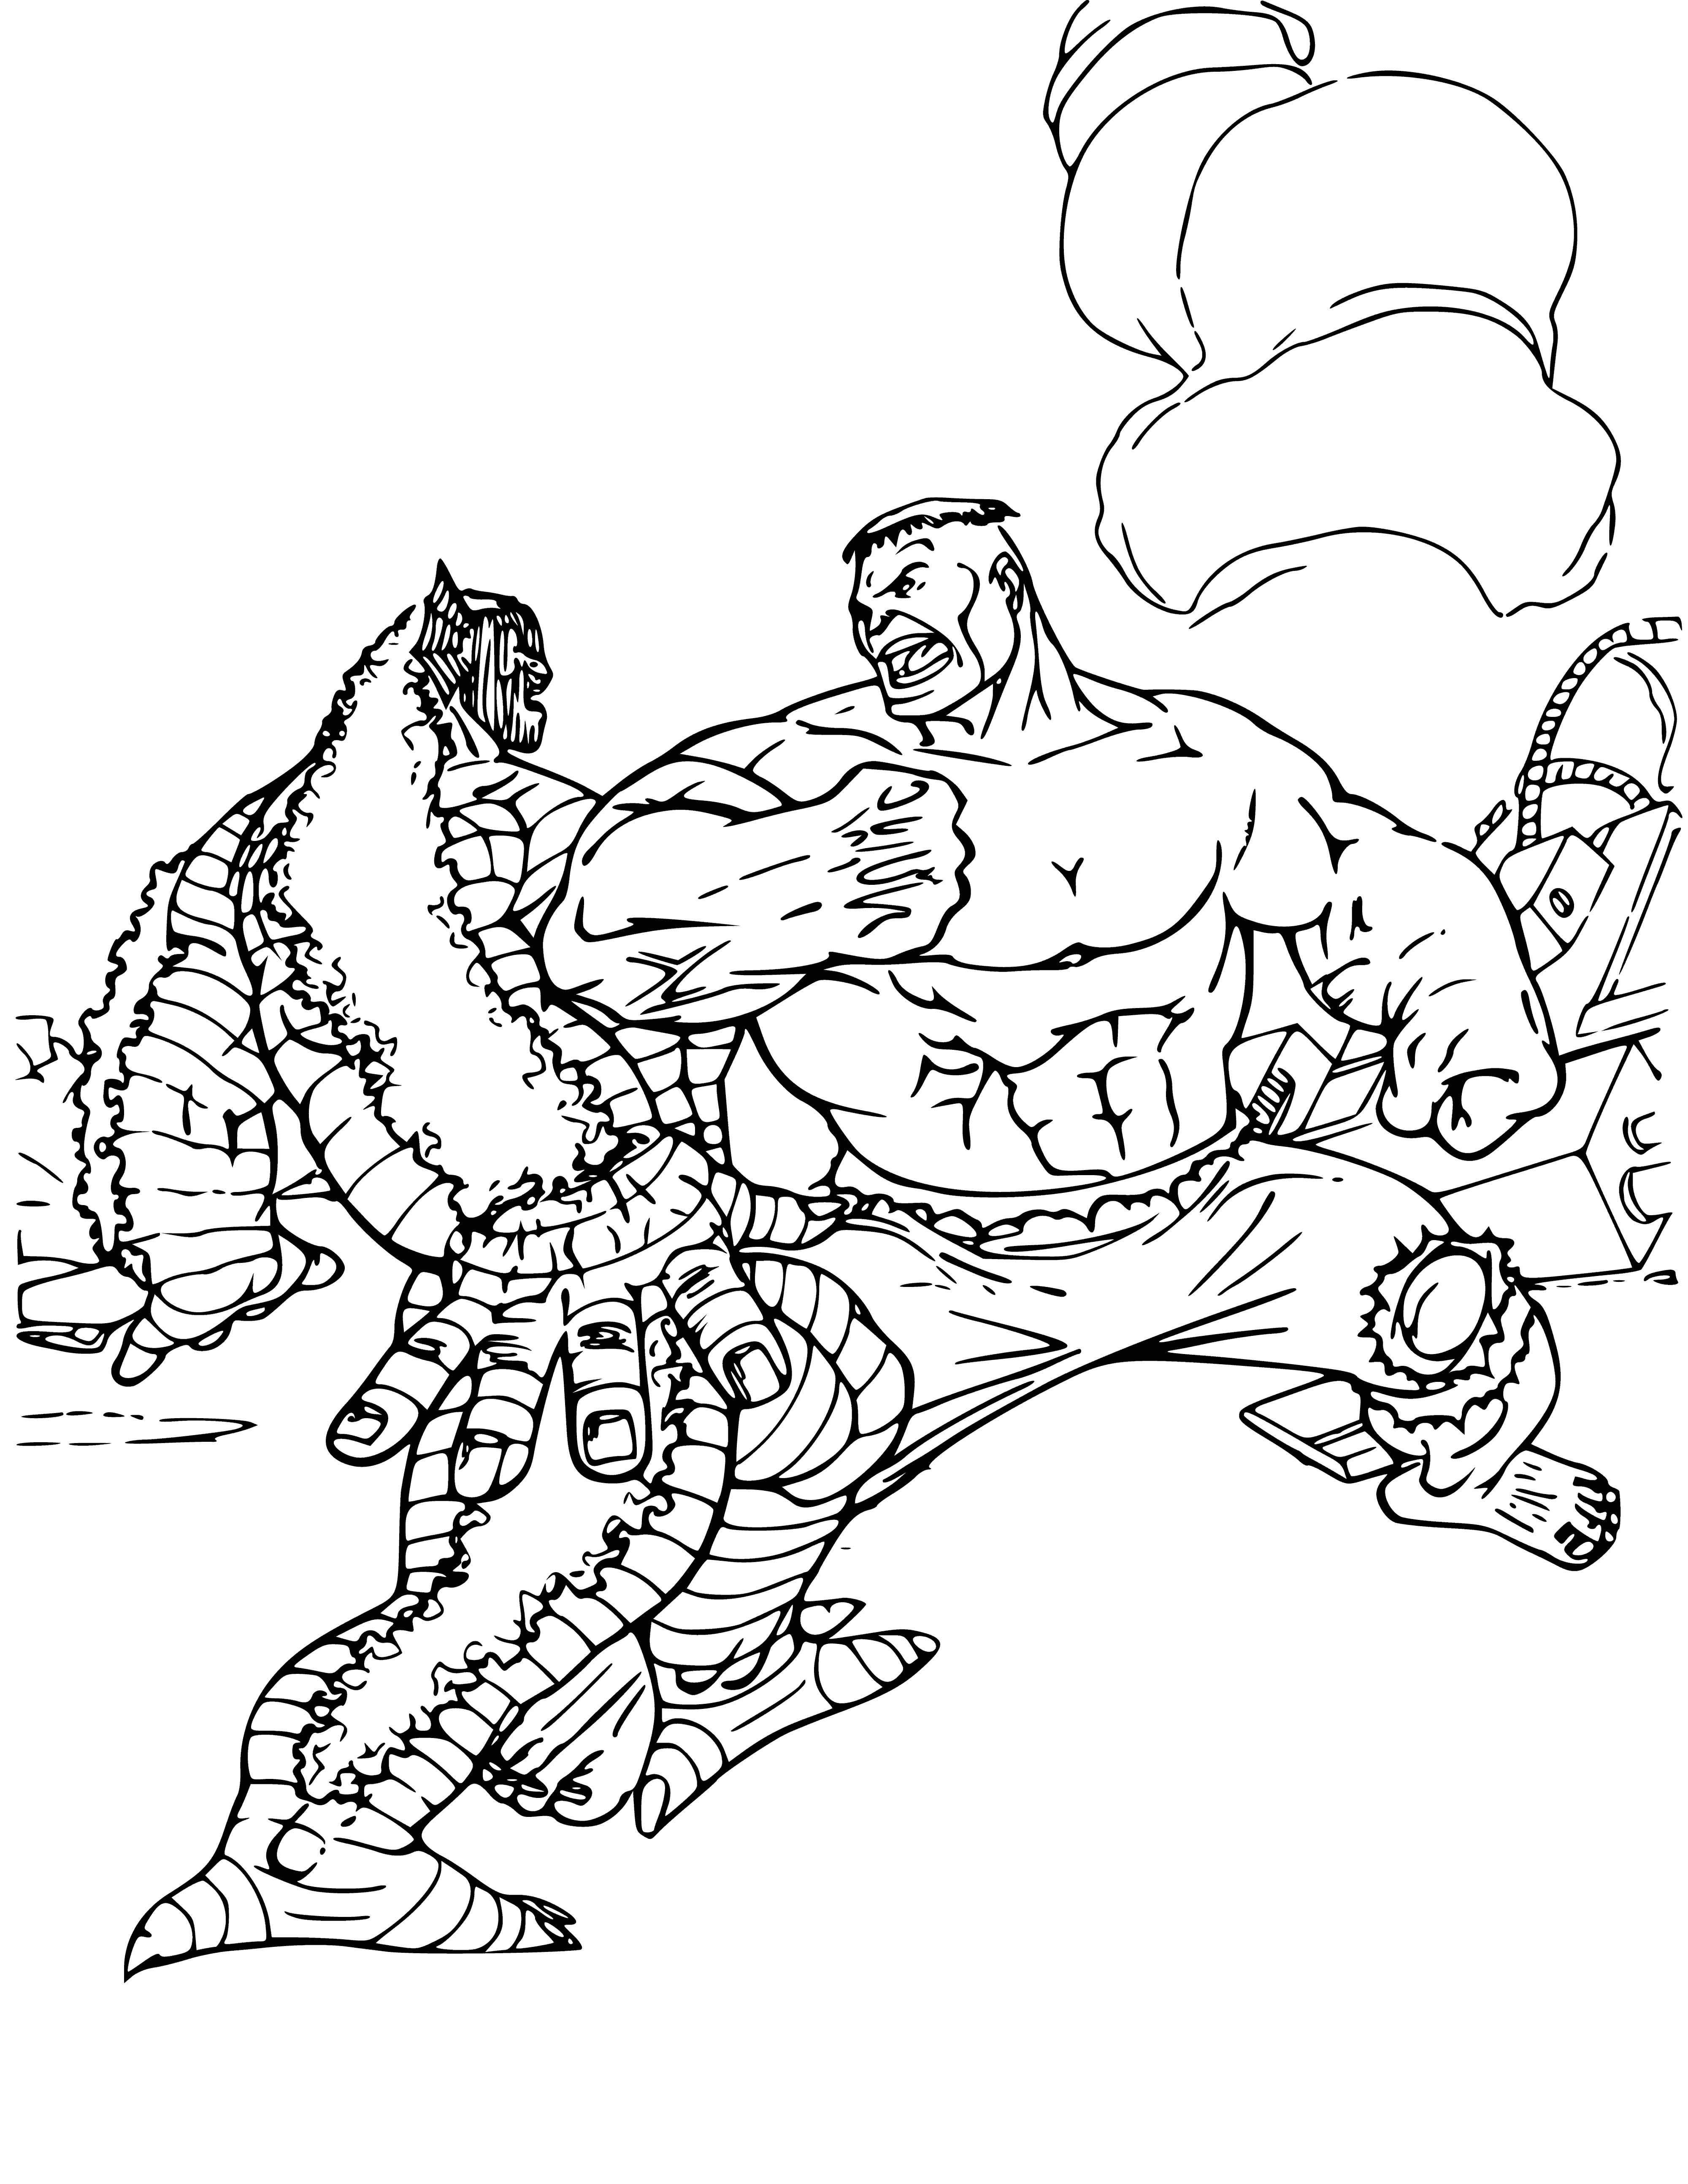 coloring page: A large, muscular, green creature with disproportioned extremities, sunken eyes and an open mouth revealing large teeth; one that looks angry.